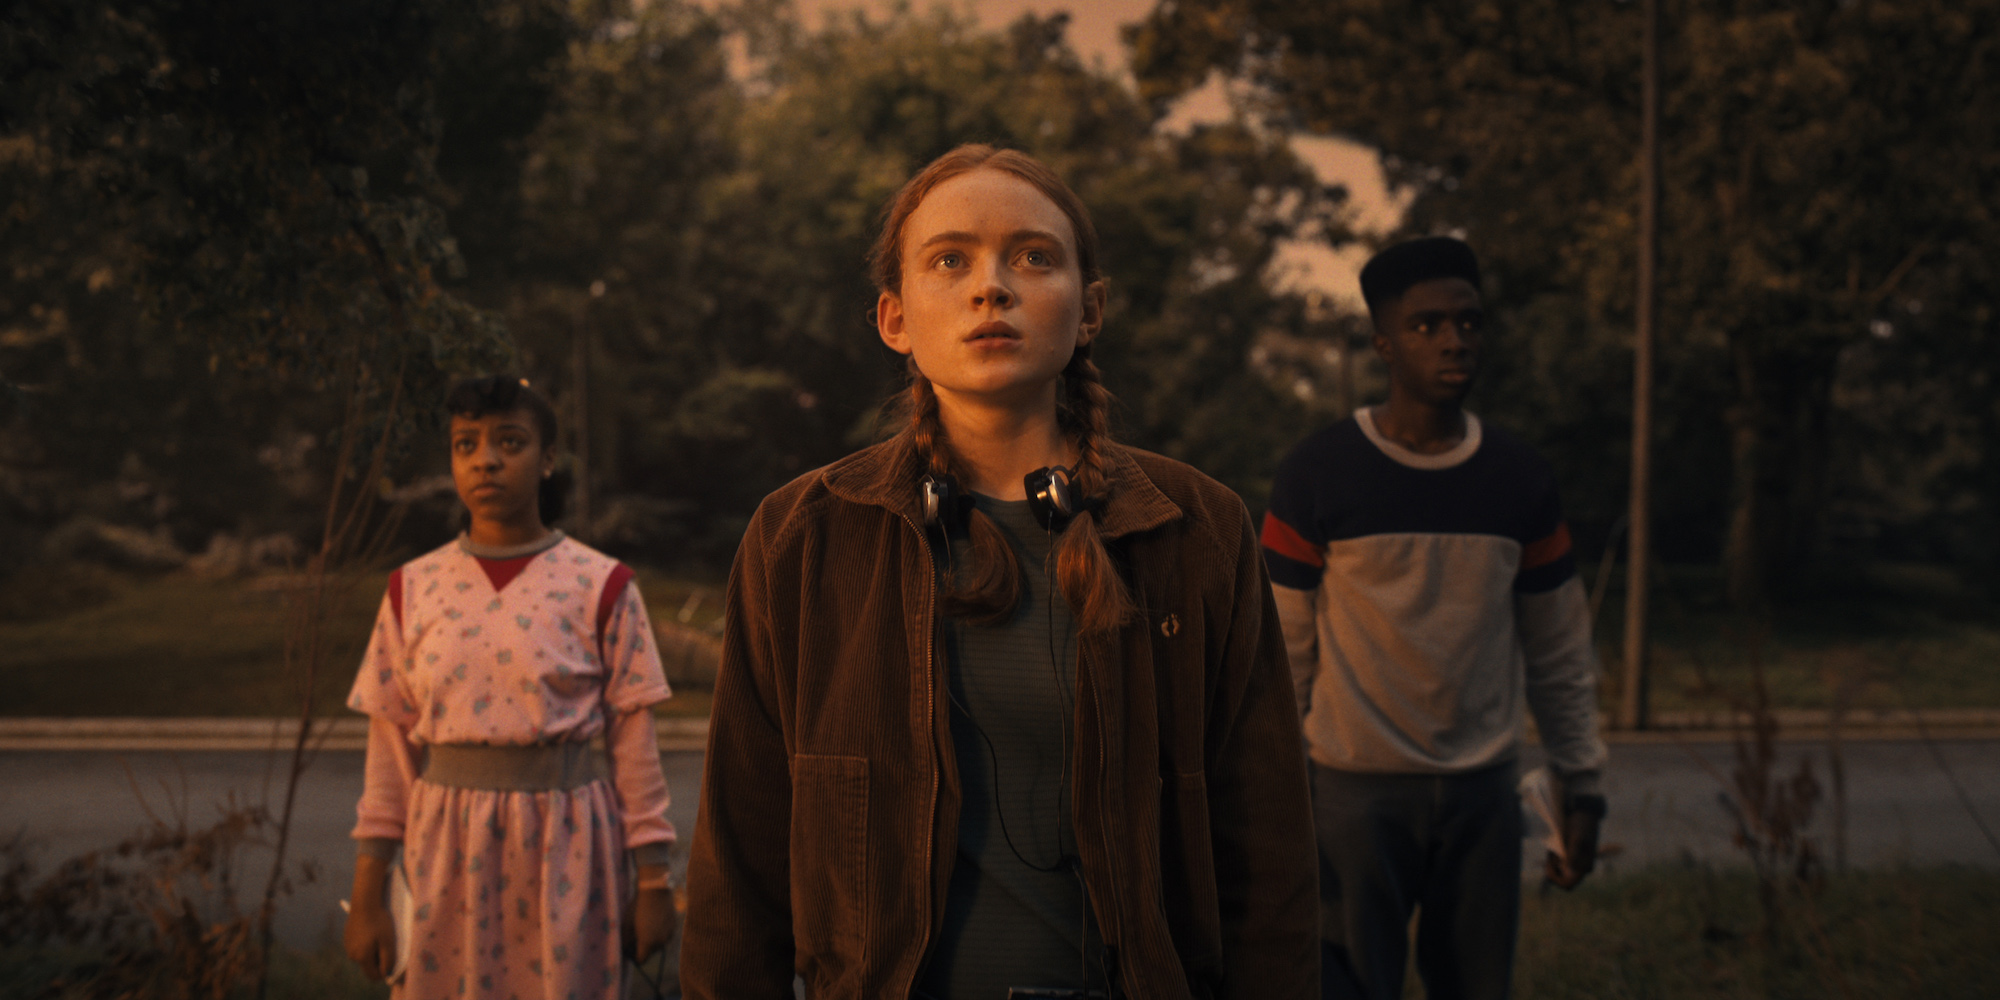 One 'Stranger Things' Season 5 theory suggests Max, played by Sadie Sink and seen here in a production still, might return as a bad guy.